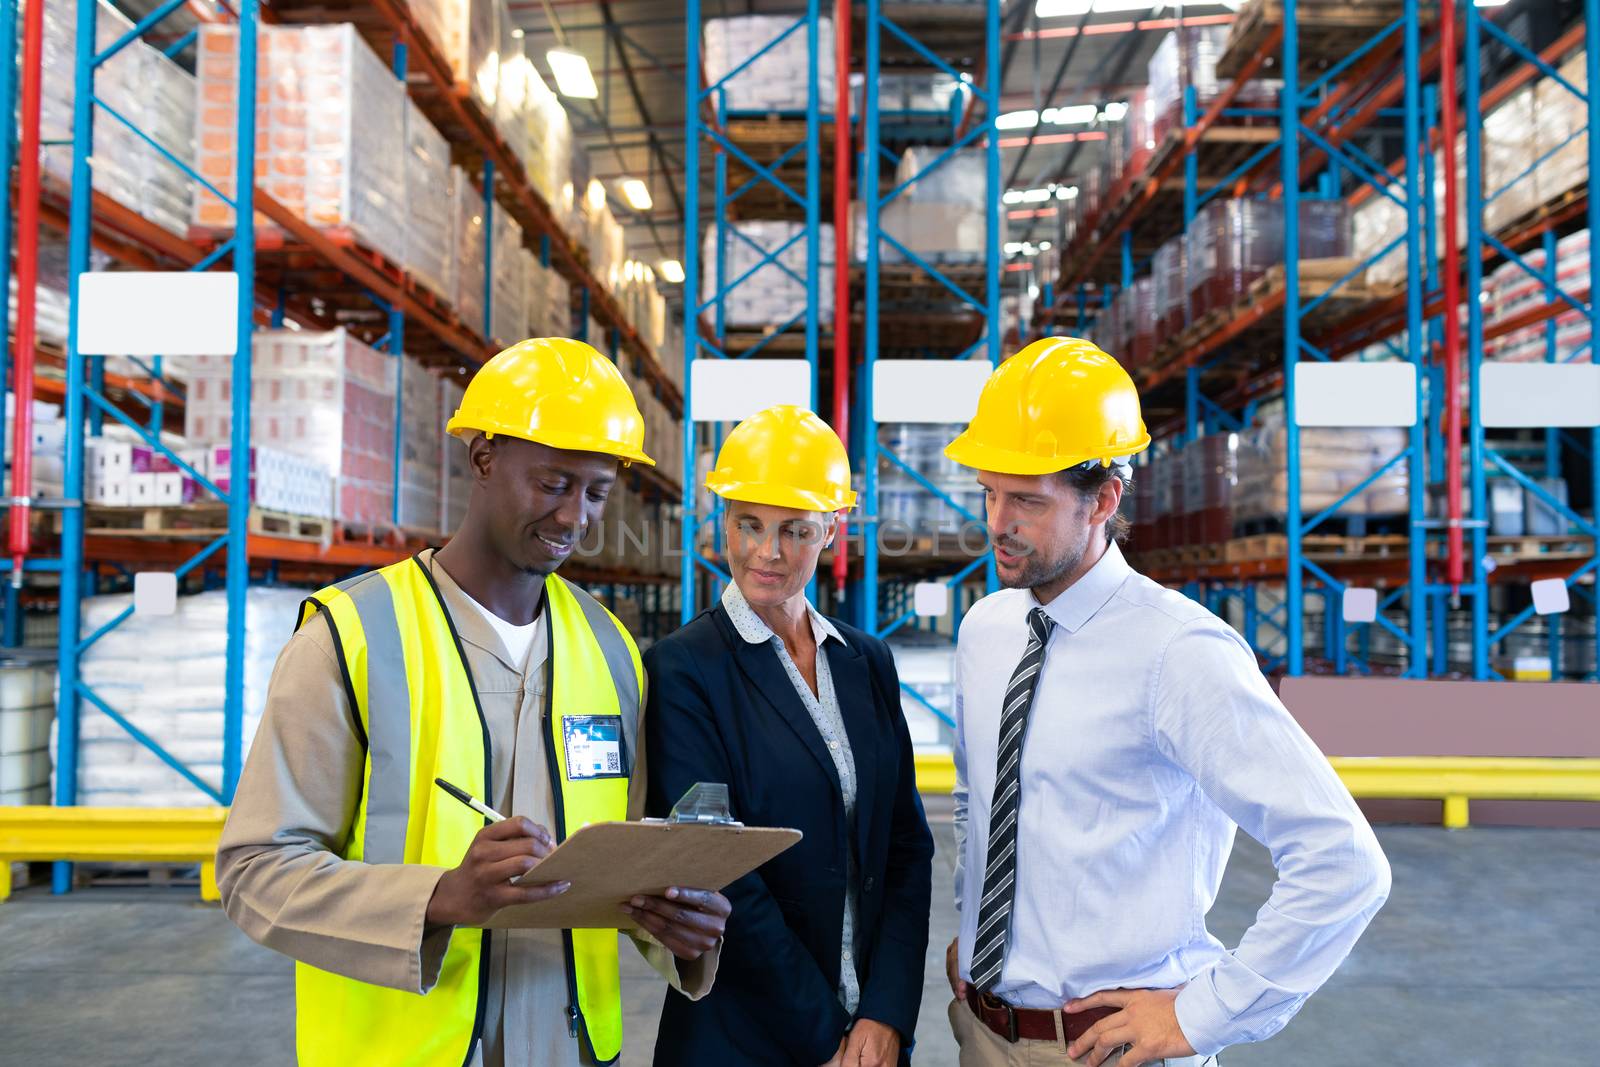 Multi-ethnic staffs working together on clipboard in warehouse by Wavebreakmedia